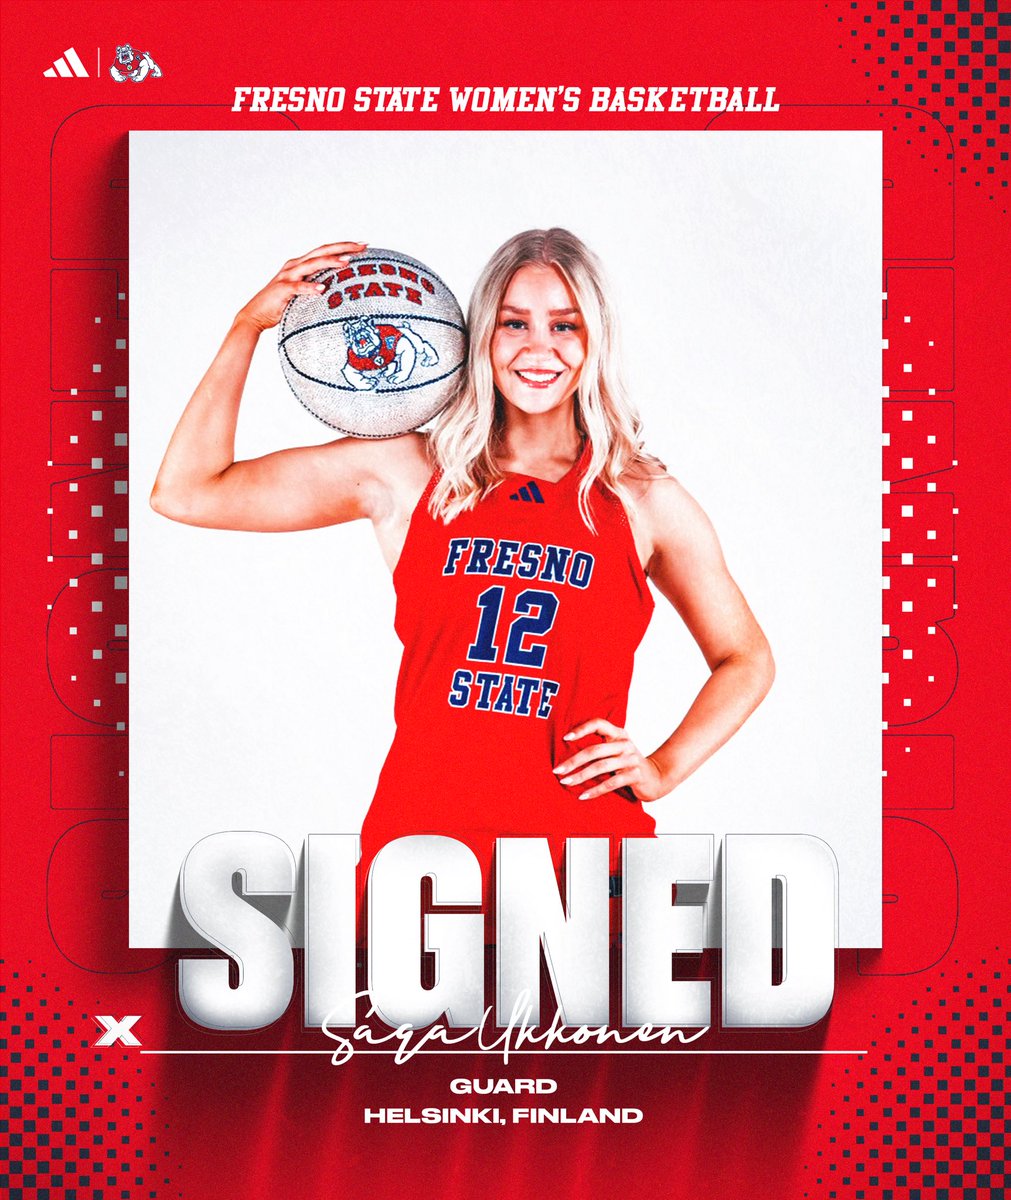 𝙎𝙄𝙂𝙉𝙀𝘿🖋️ It’s official, welcome to the Bulldog family Saga! 🐾 #GoDogs ✖️ #Elevate